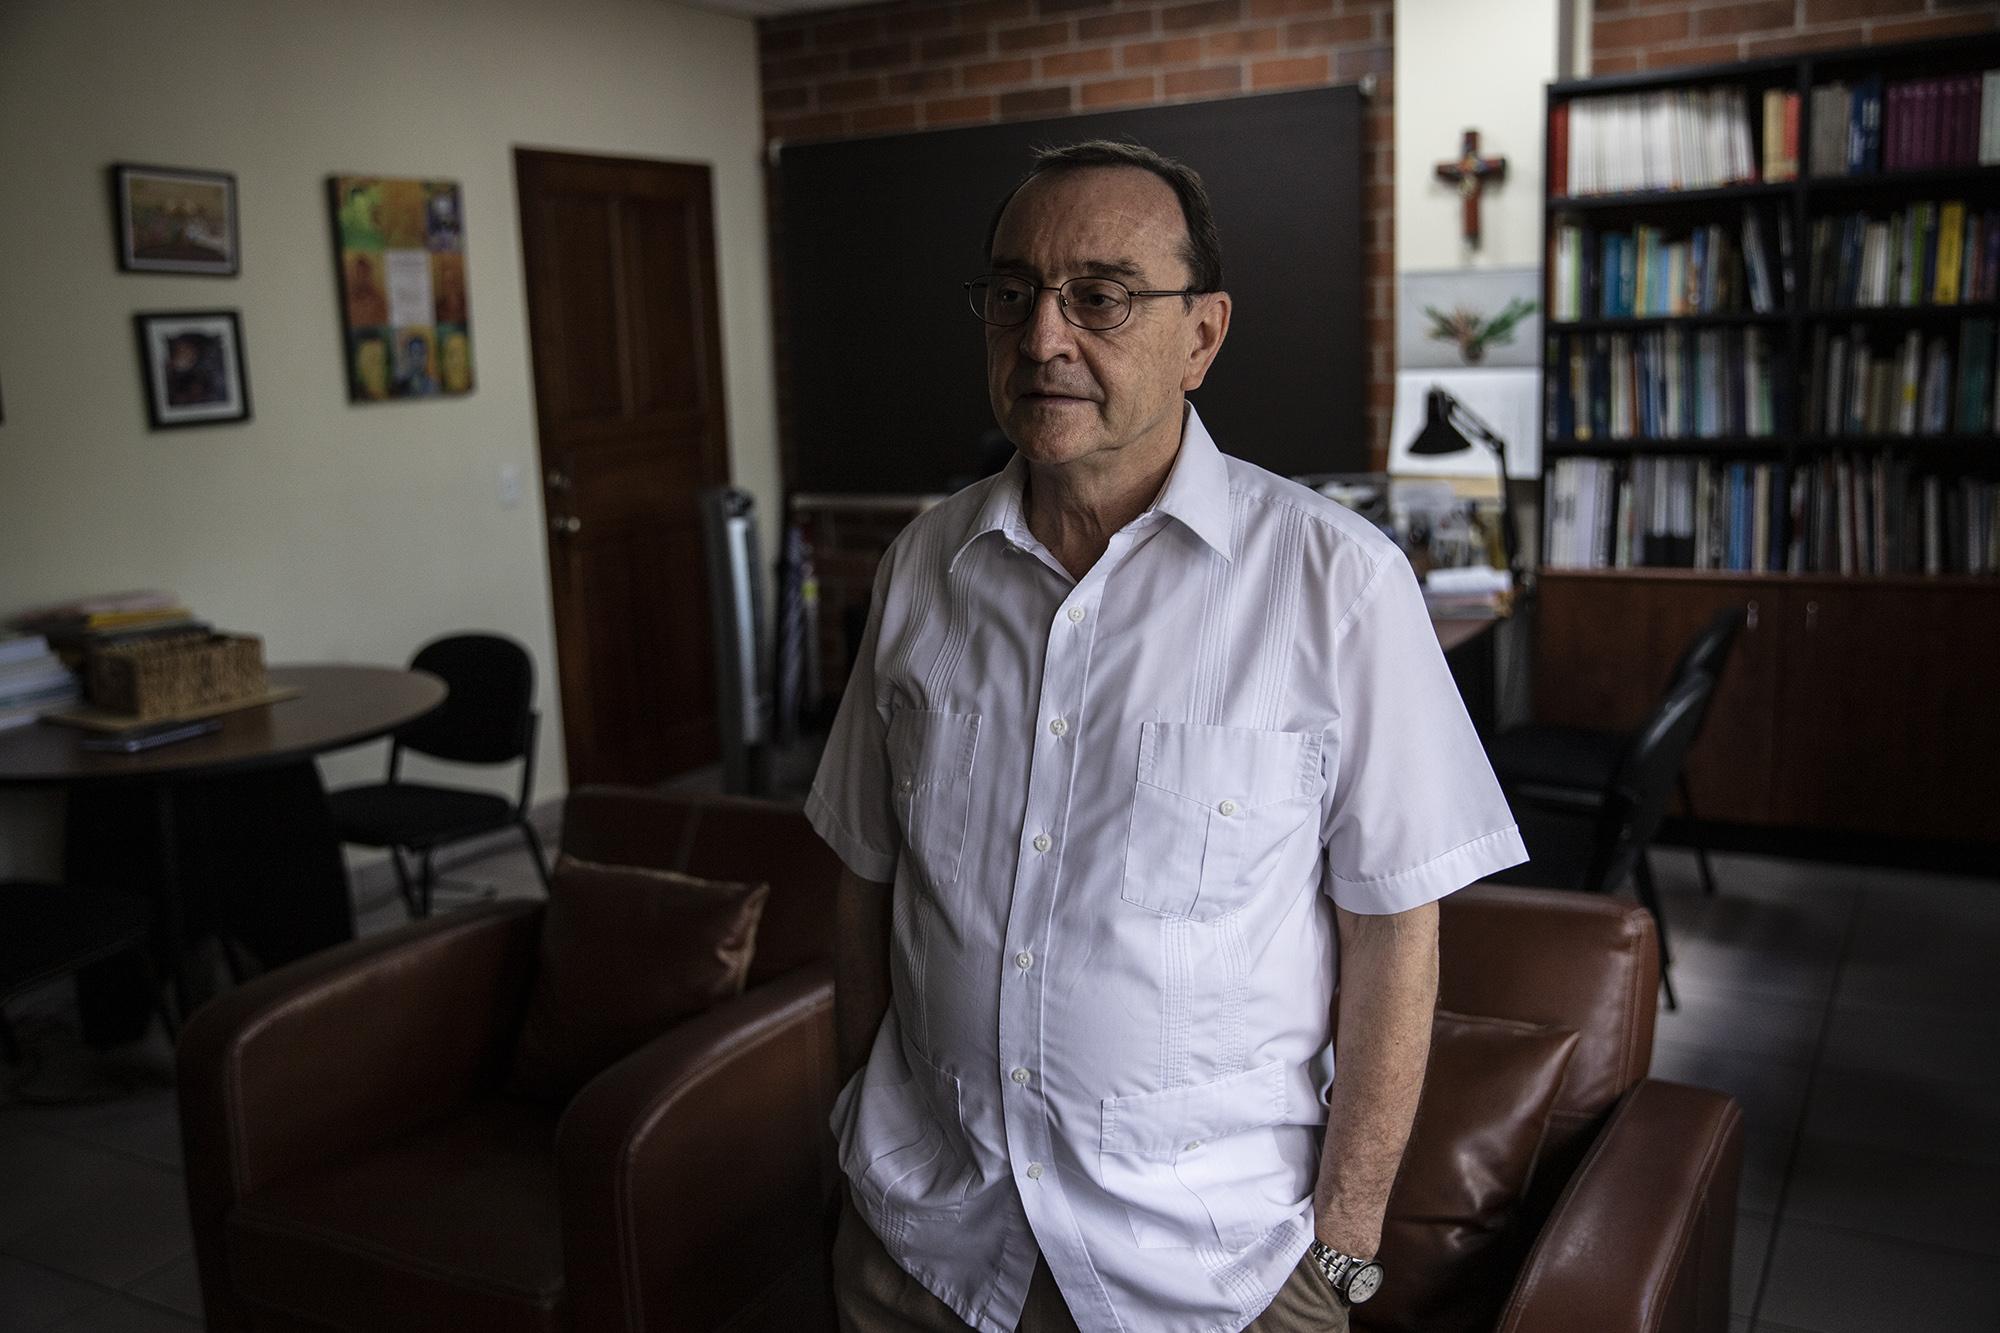 Jesuit priest Andreu Oliva has served as the rector of University of Central America - El Salvador since 2011, when he replaced Father José María Tojeria. In January, Oliva completed his eleventh year as head of the university. Photo: Carlos Barrera/El Faro